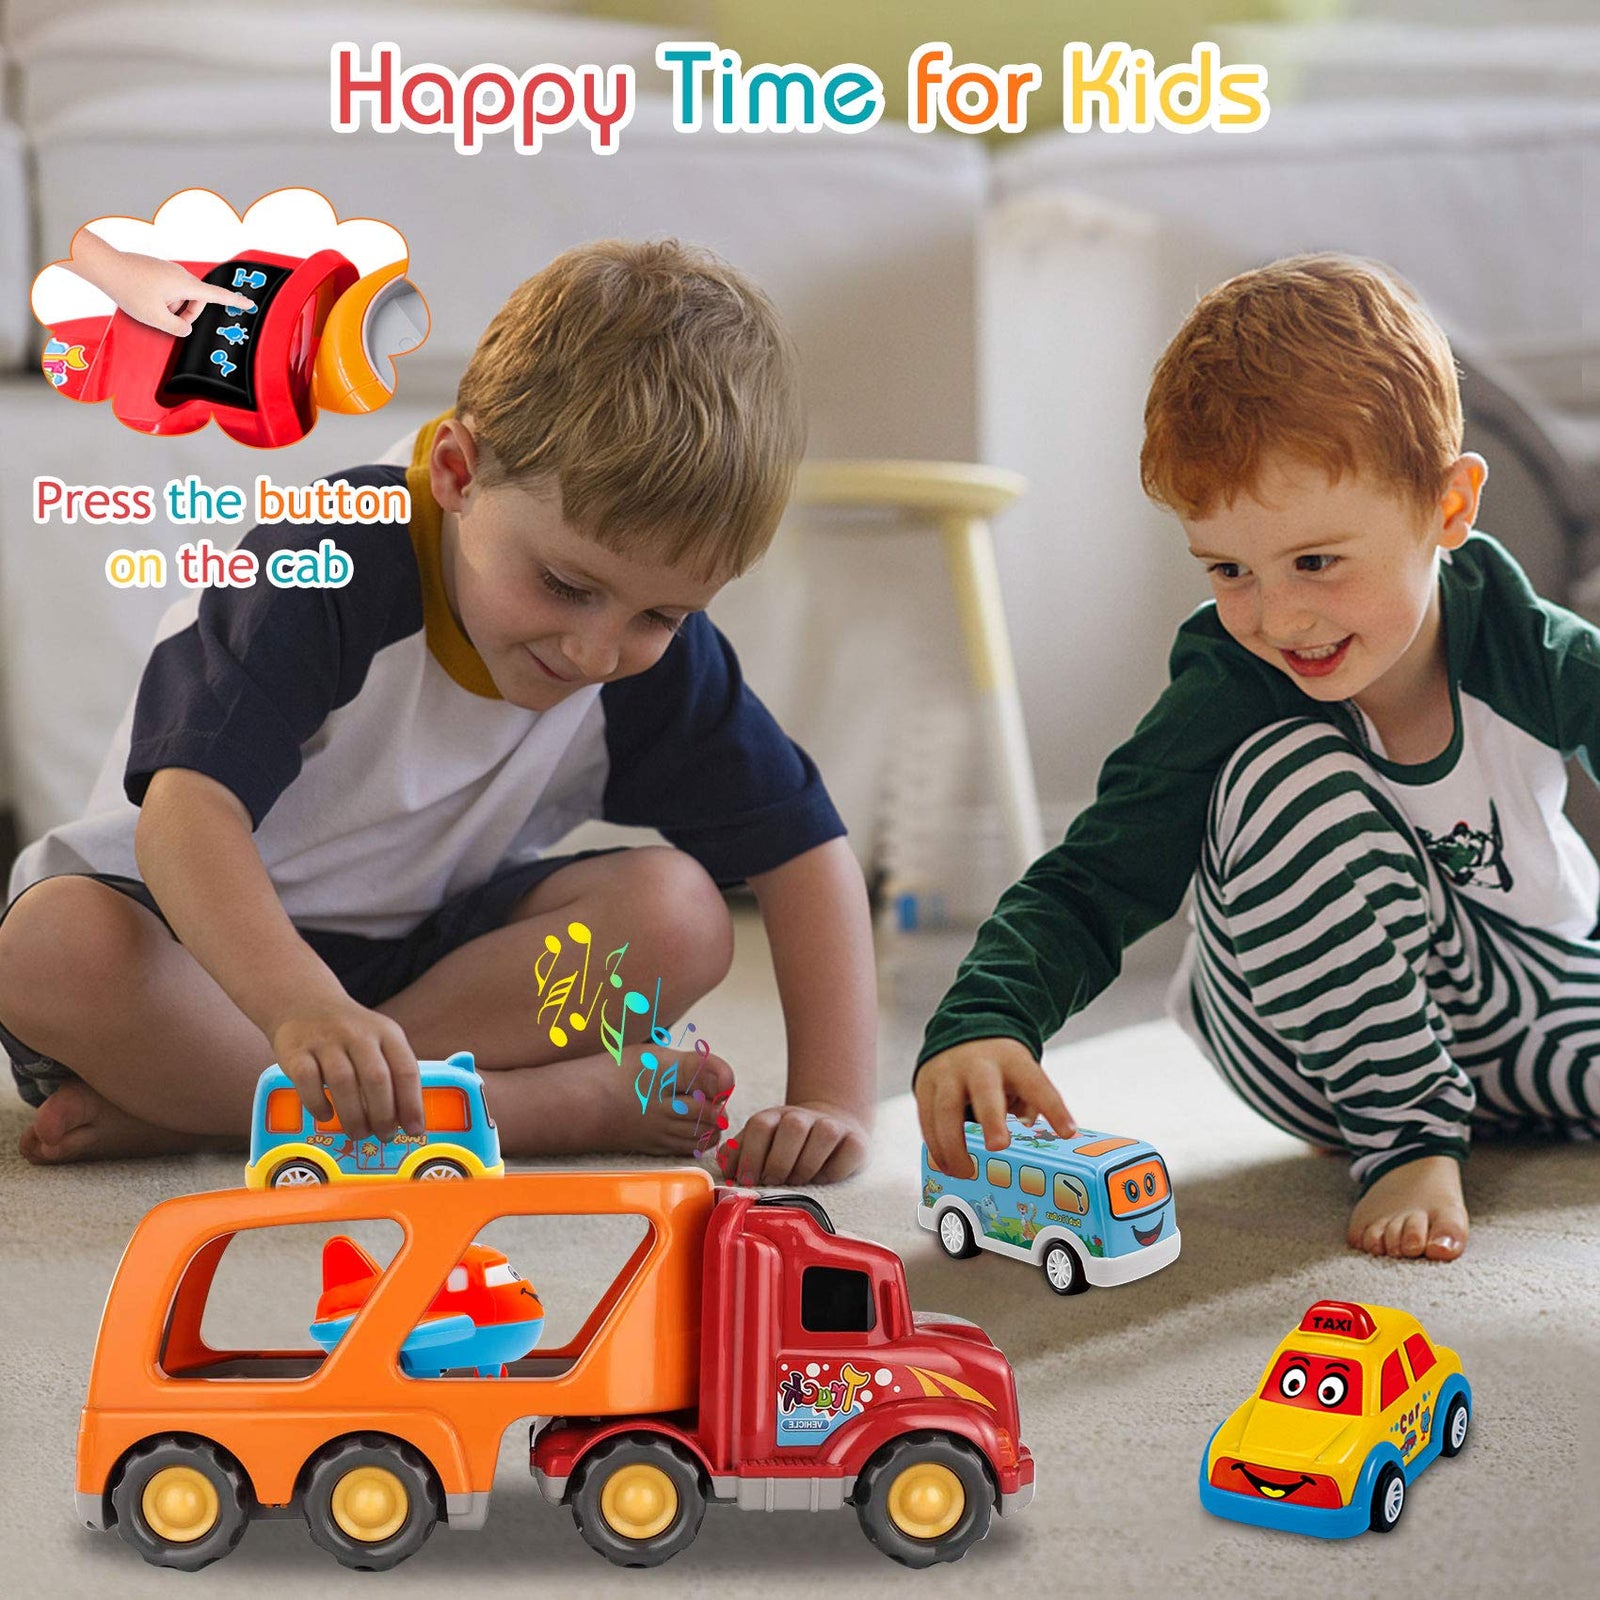 Toddler Toys Car for Boys: Kids Toys for 1 2 3 4 5 6 Year Old Boys | Boy Toys 5 in 1 Carrier Toy Trucks | Toddler Toys Age 2-4 Baby Toys 12-18 Months Christmas Birthday Kids Gift Toddler Toys Age 1-2